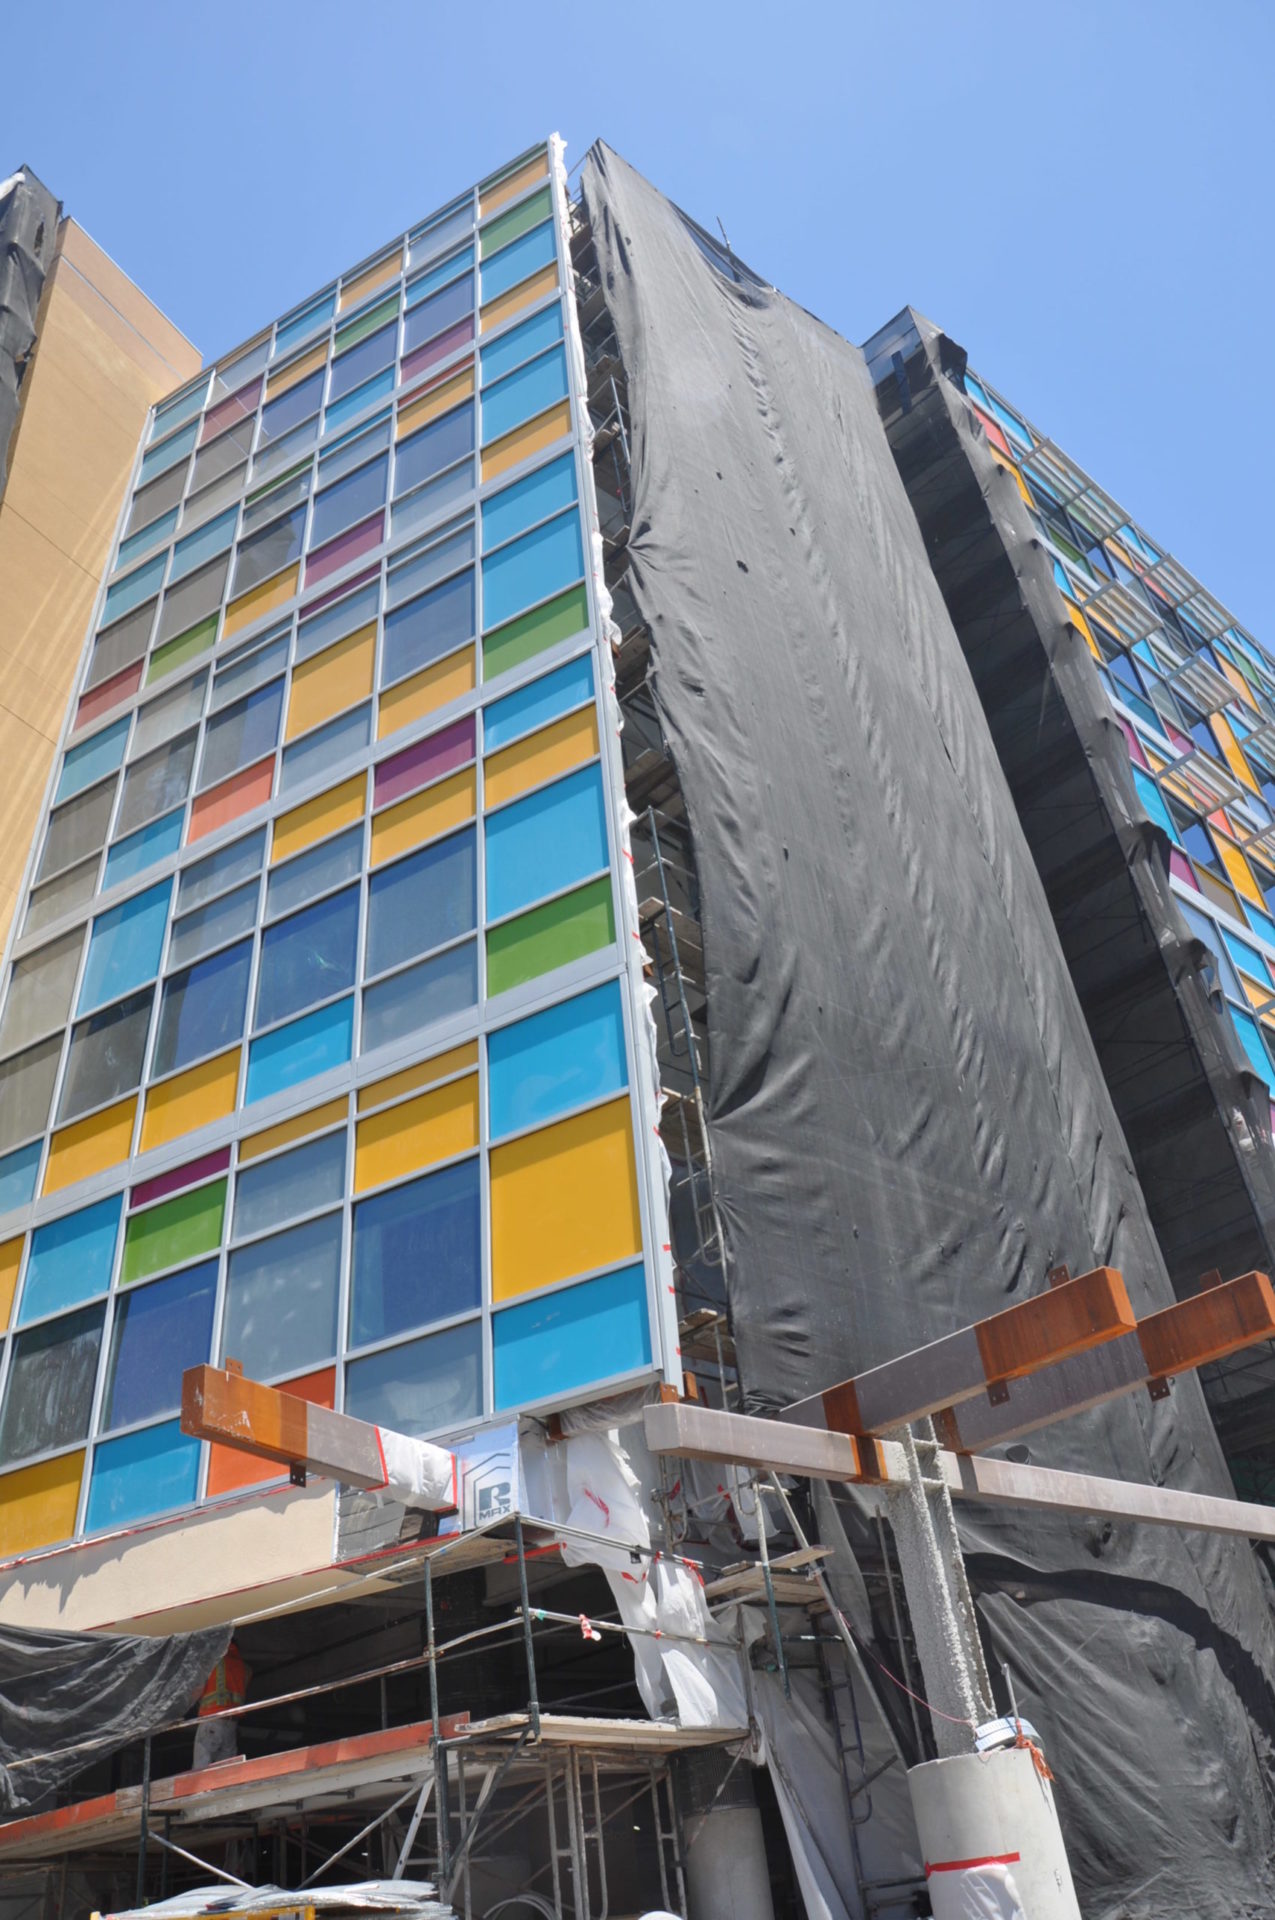 Image from the Gallery: UCSF Benioff Children’s Hospital – Oakland, CA